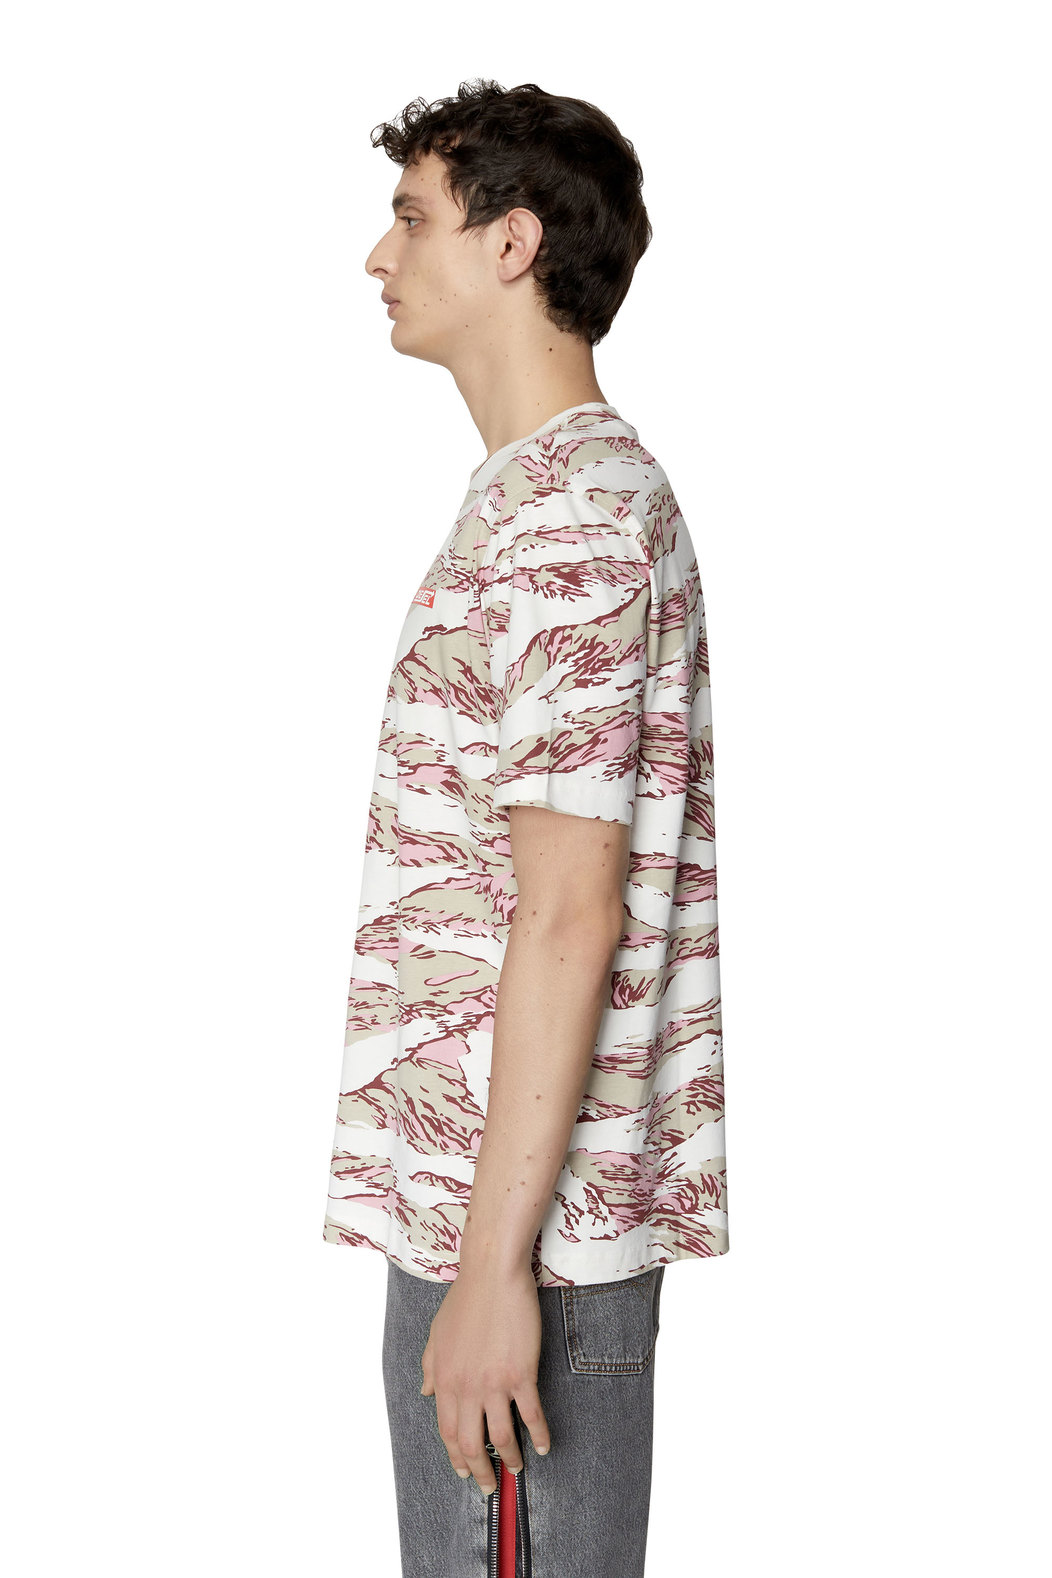 T-shirt with graphic camo print